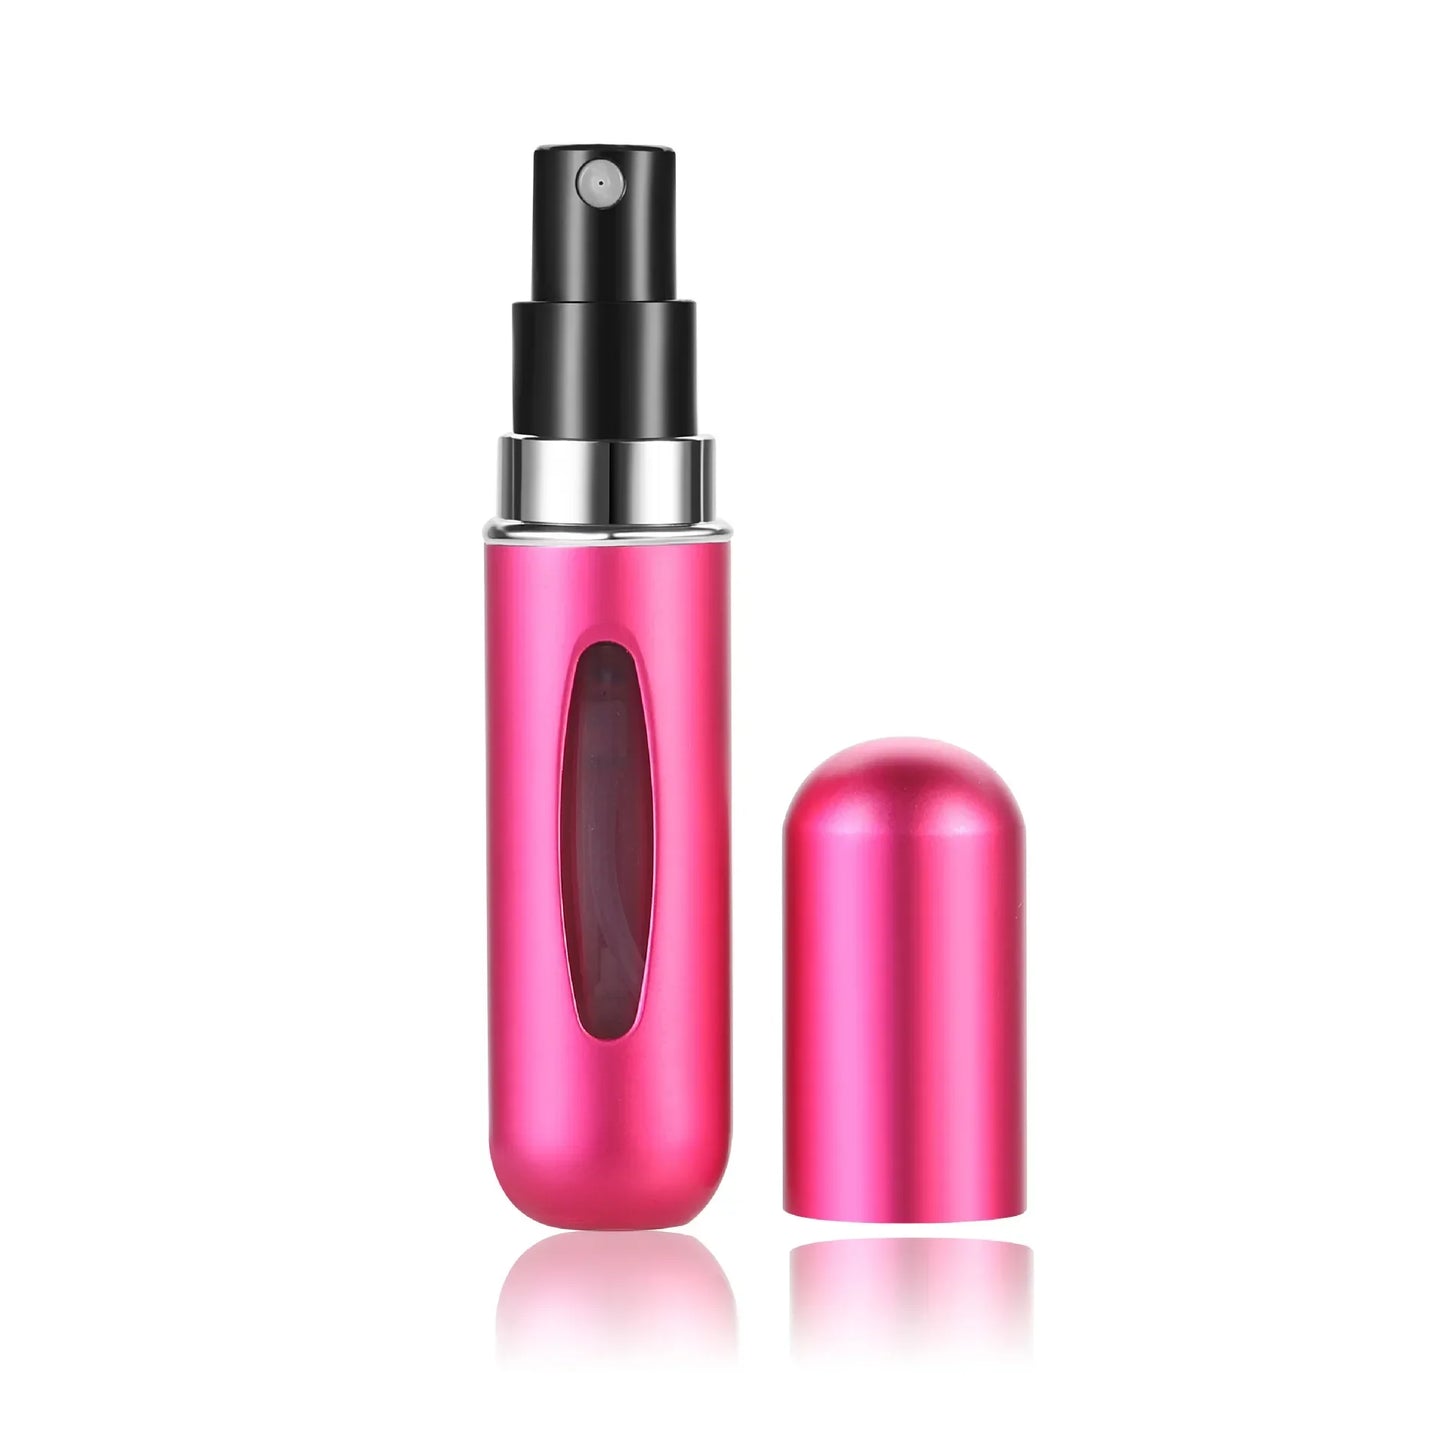 Travel-Sized Perfume Bottle - Candy Colour